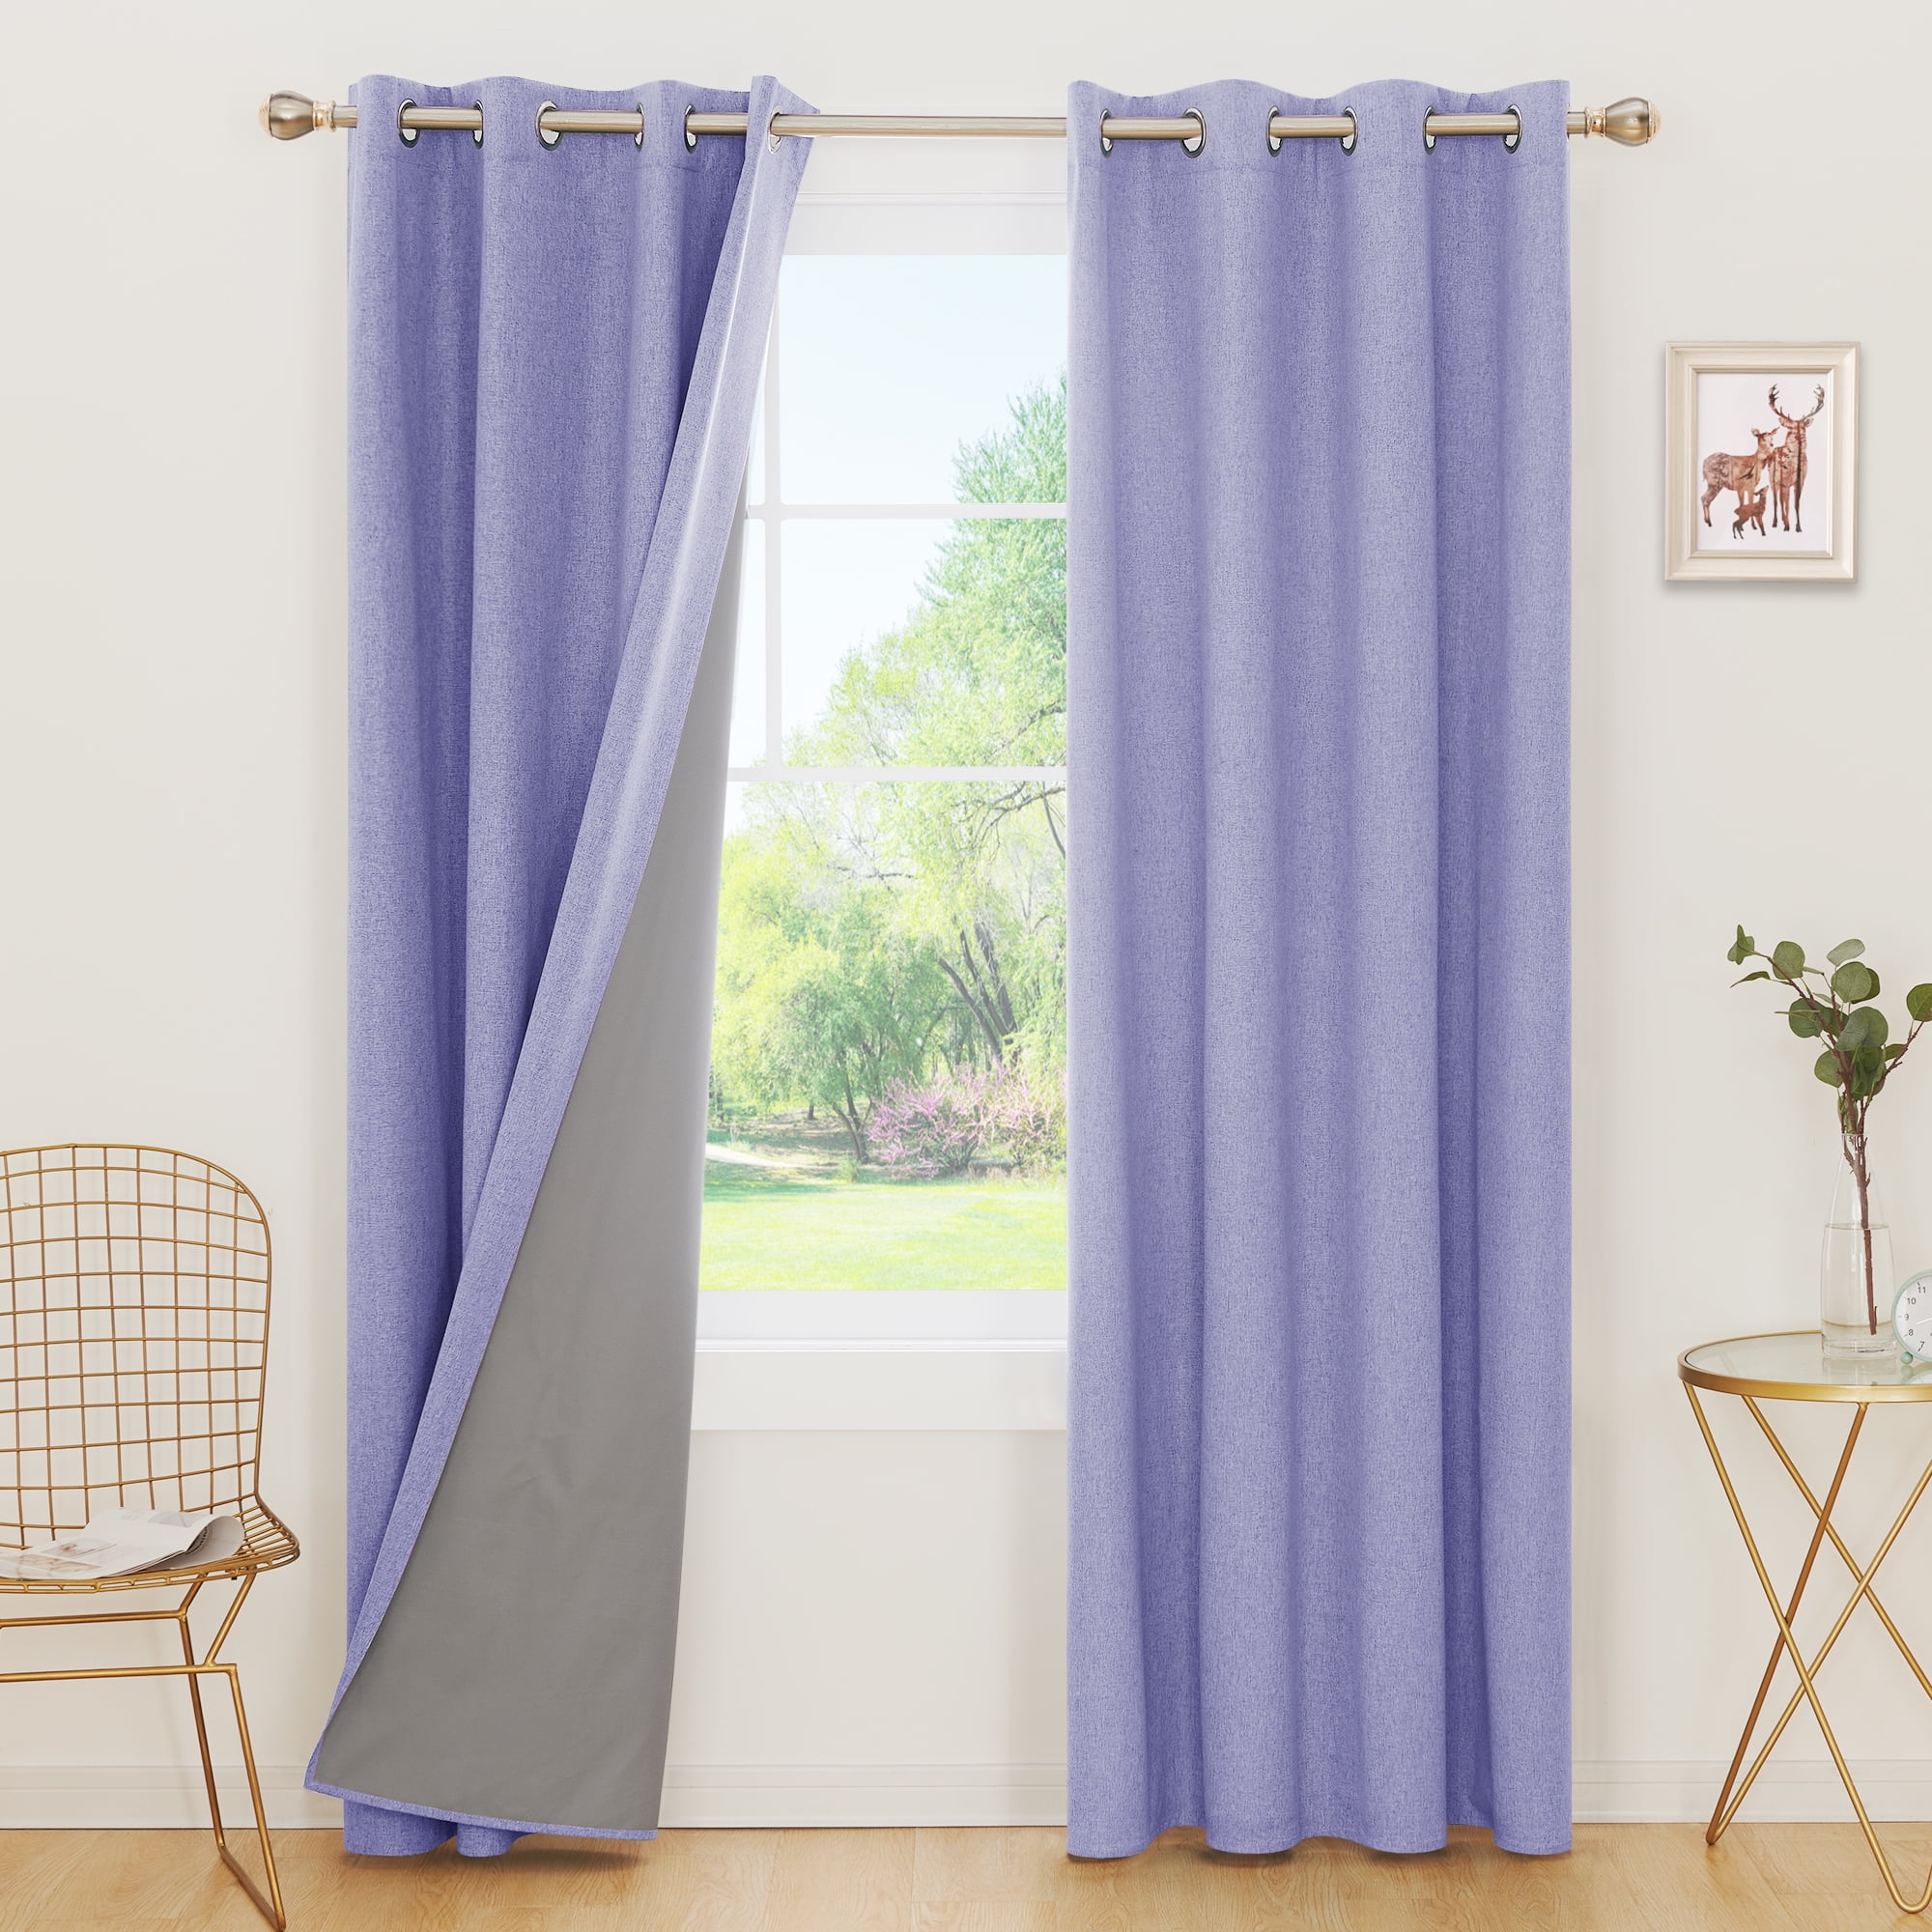 Blackout Curtains Soundproof Curtains Drop Eyelet Top Thermal for Bedroom 